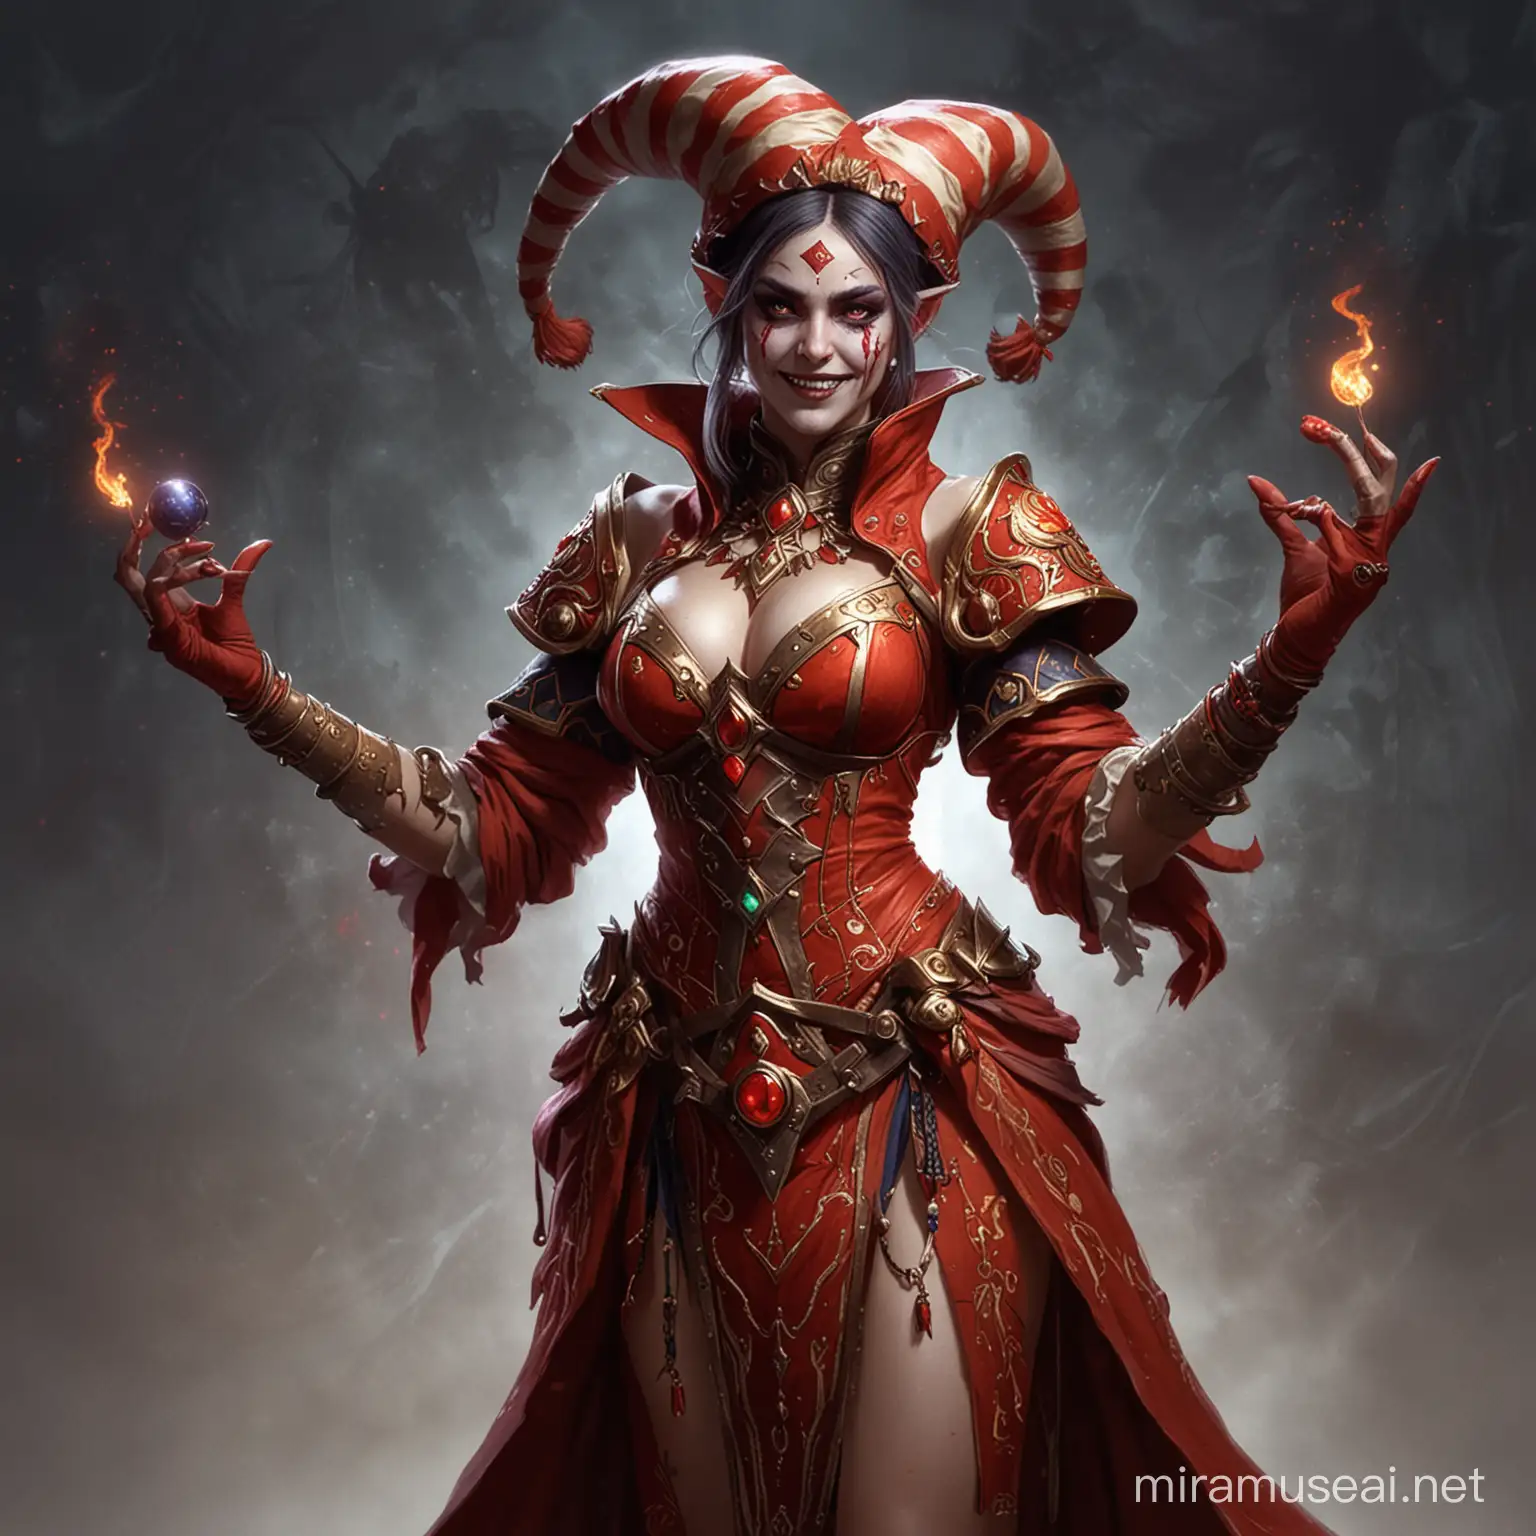 elemental, ethereal from wow, cosmic robe, circus themed, Atziri from the path of exile, fantasy, deity, red colors, two faced being, many limbs, different emotions, elation, jester, trickster pose, menacing, world of warcraft styled, female obscured figure, realistic hands, holding circus-like props